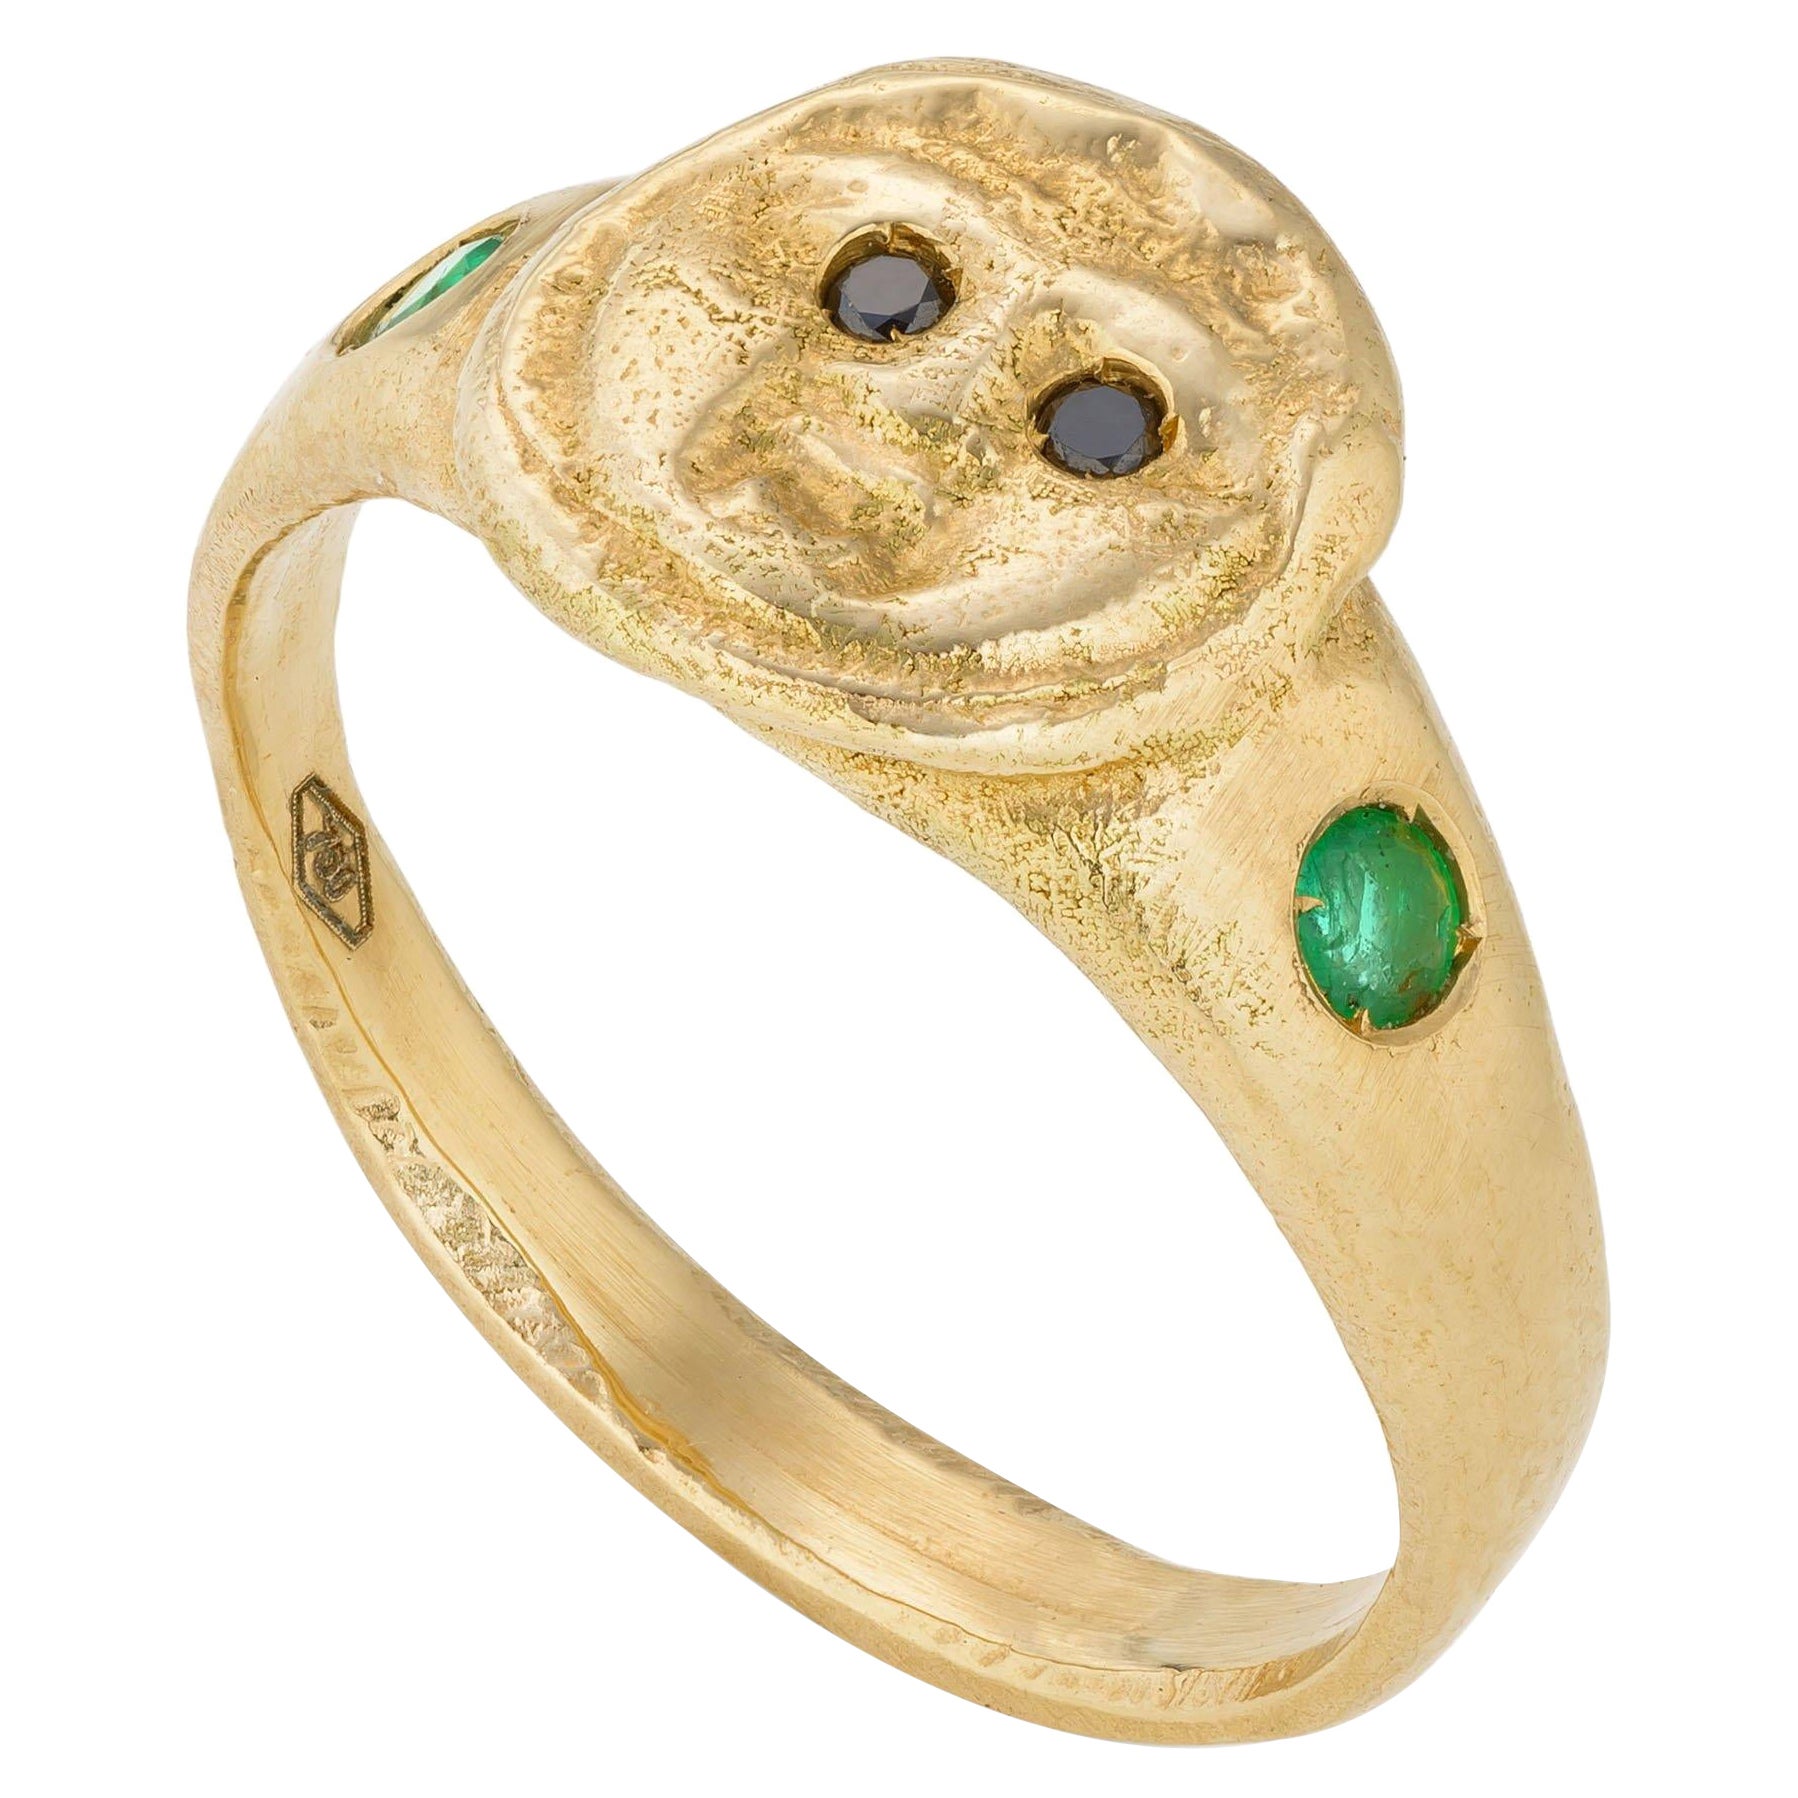 Gorgoneion Pinky Ring, 18 Karat Yellow Gold with Black Diamond and Emerald For Sale